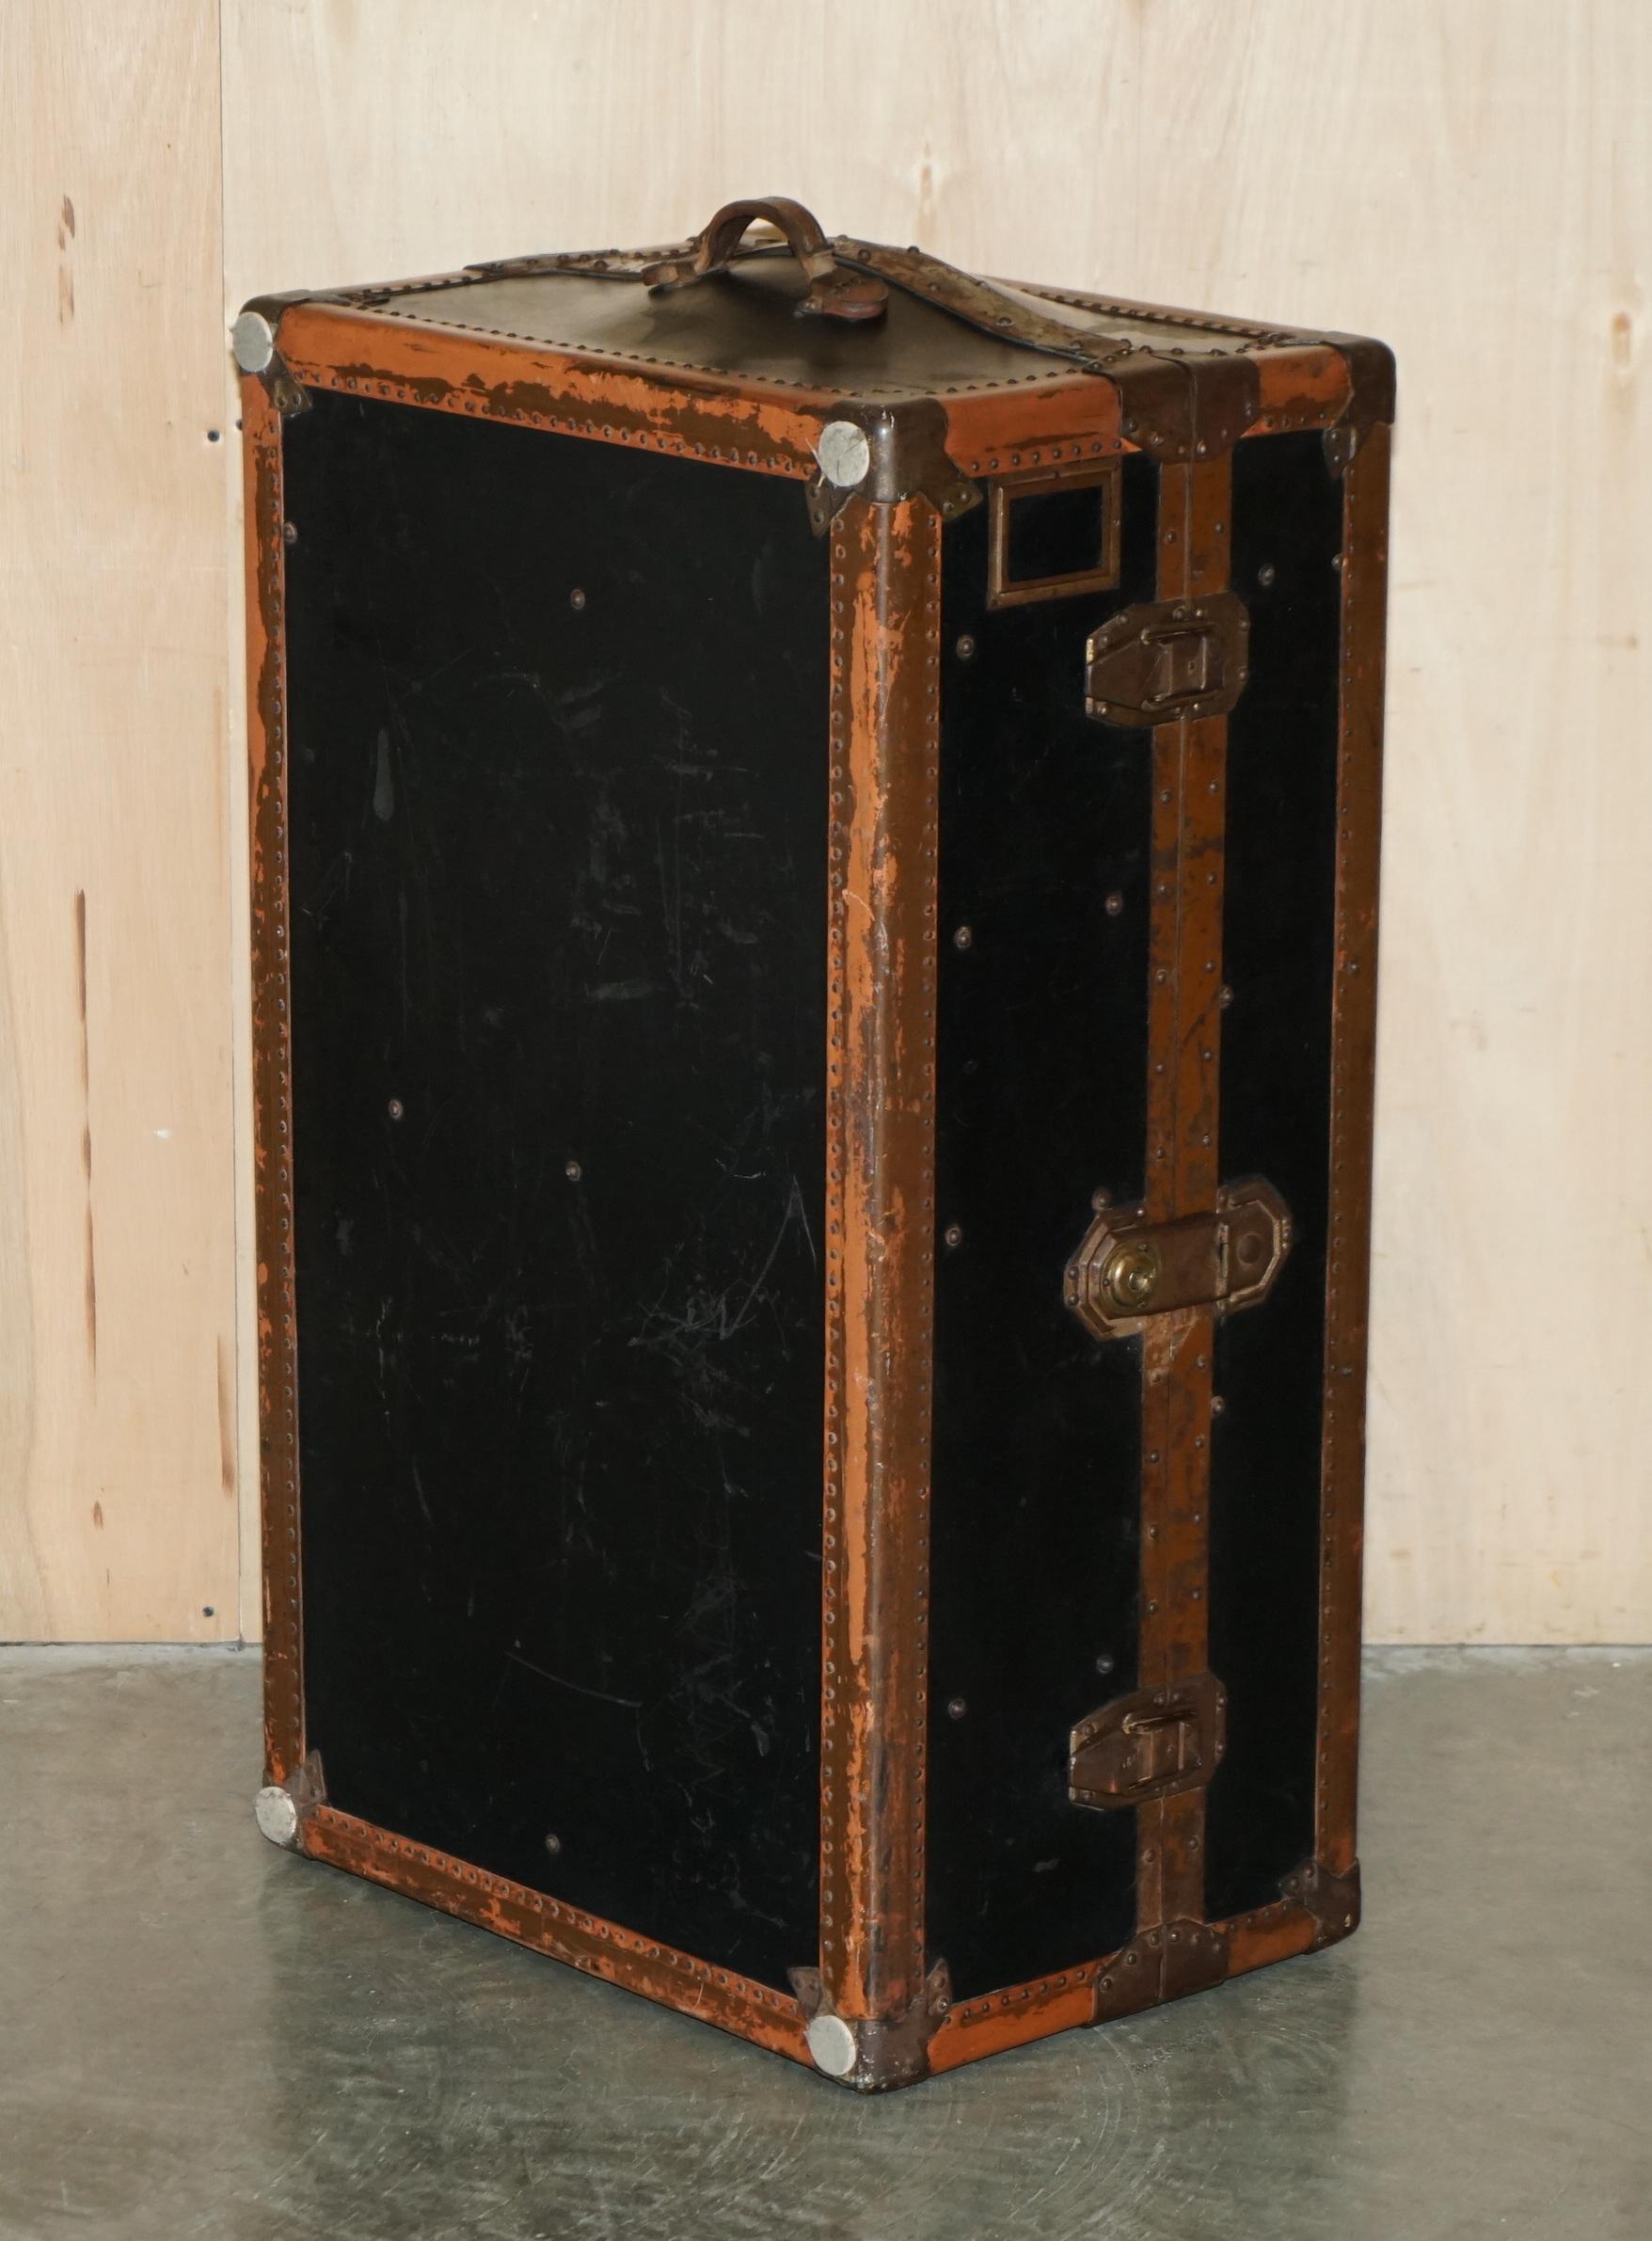 Royal House Antiques

Royal House Antiques is delighted to offer for sale this lovely decorative brown leather and steel wardrobe steamer trunk made by Innovation with original internals

Please note the delivery fee listed is just a guide, it